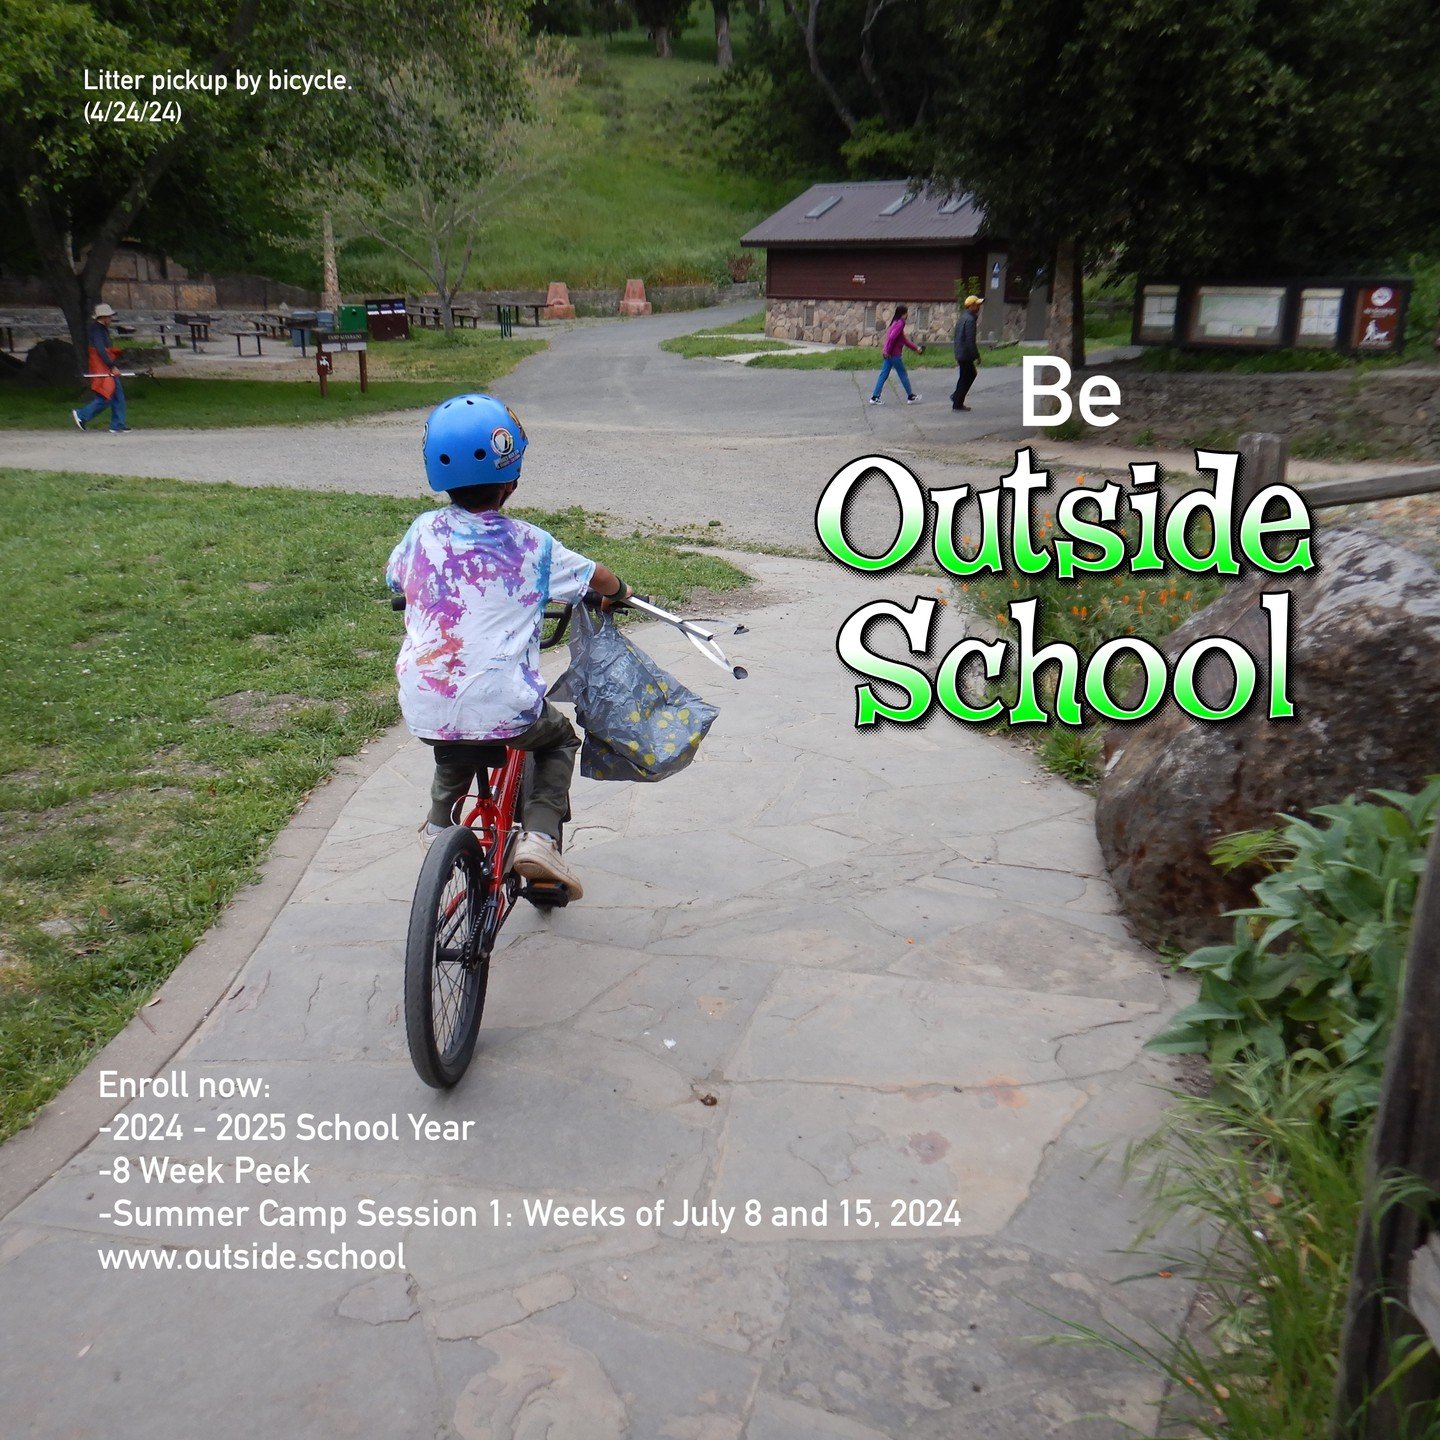 We&rsquo;d love to have you join our ridiculously tiny program and be one of the people in our neighborhood! We&rsquo;re permitted to operate in Wildcat Canyon Regional Park, which has been our home since 2019.

Sign up now for Outside School! 

-202